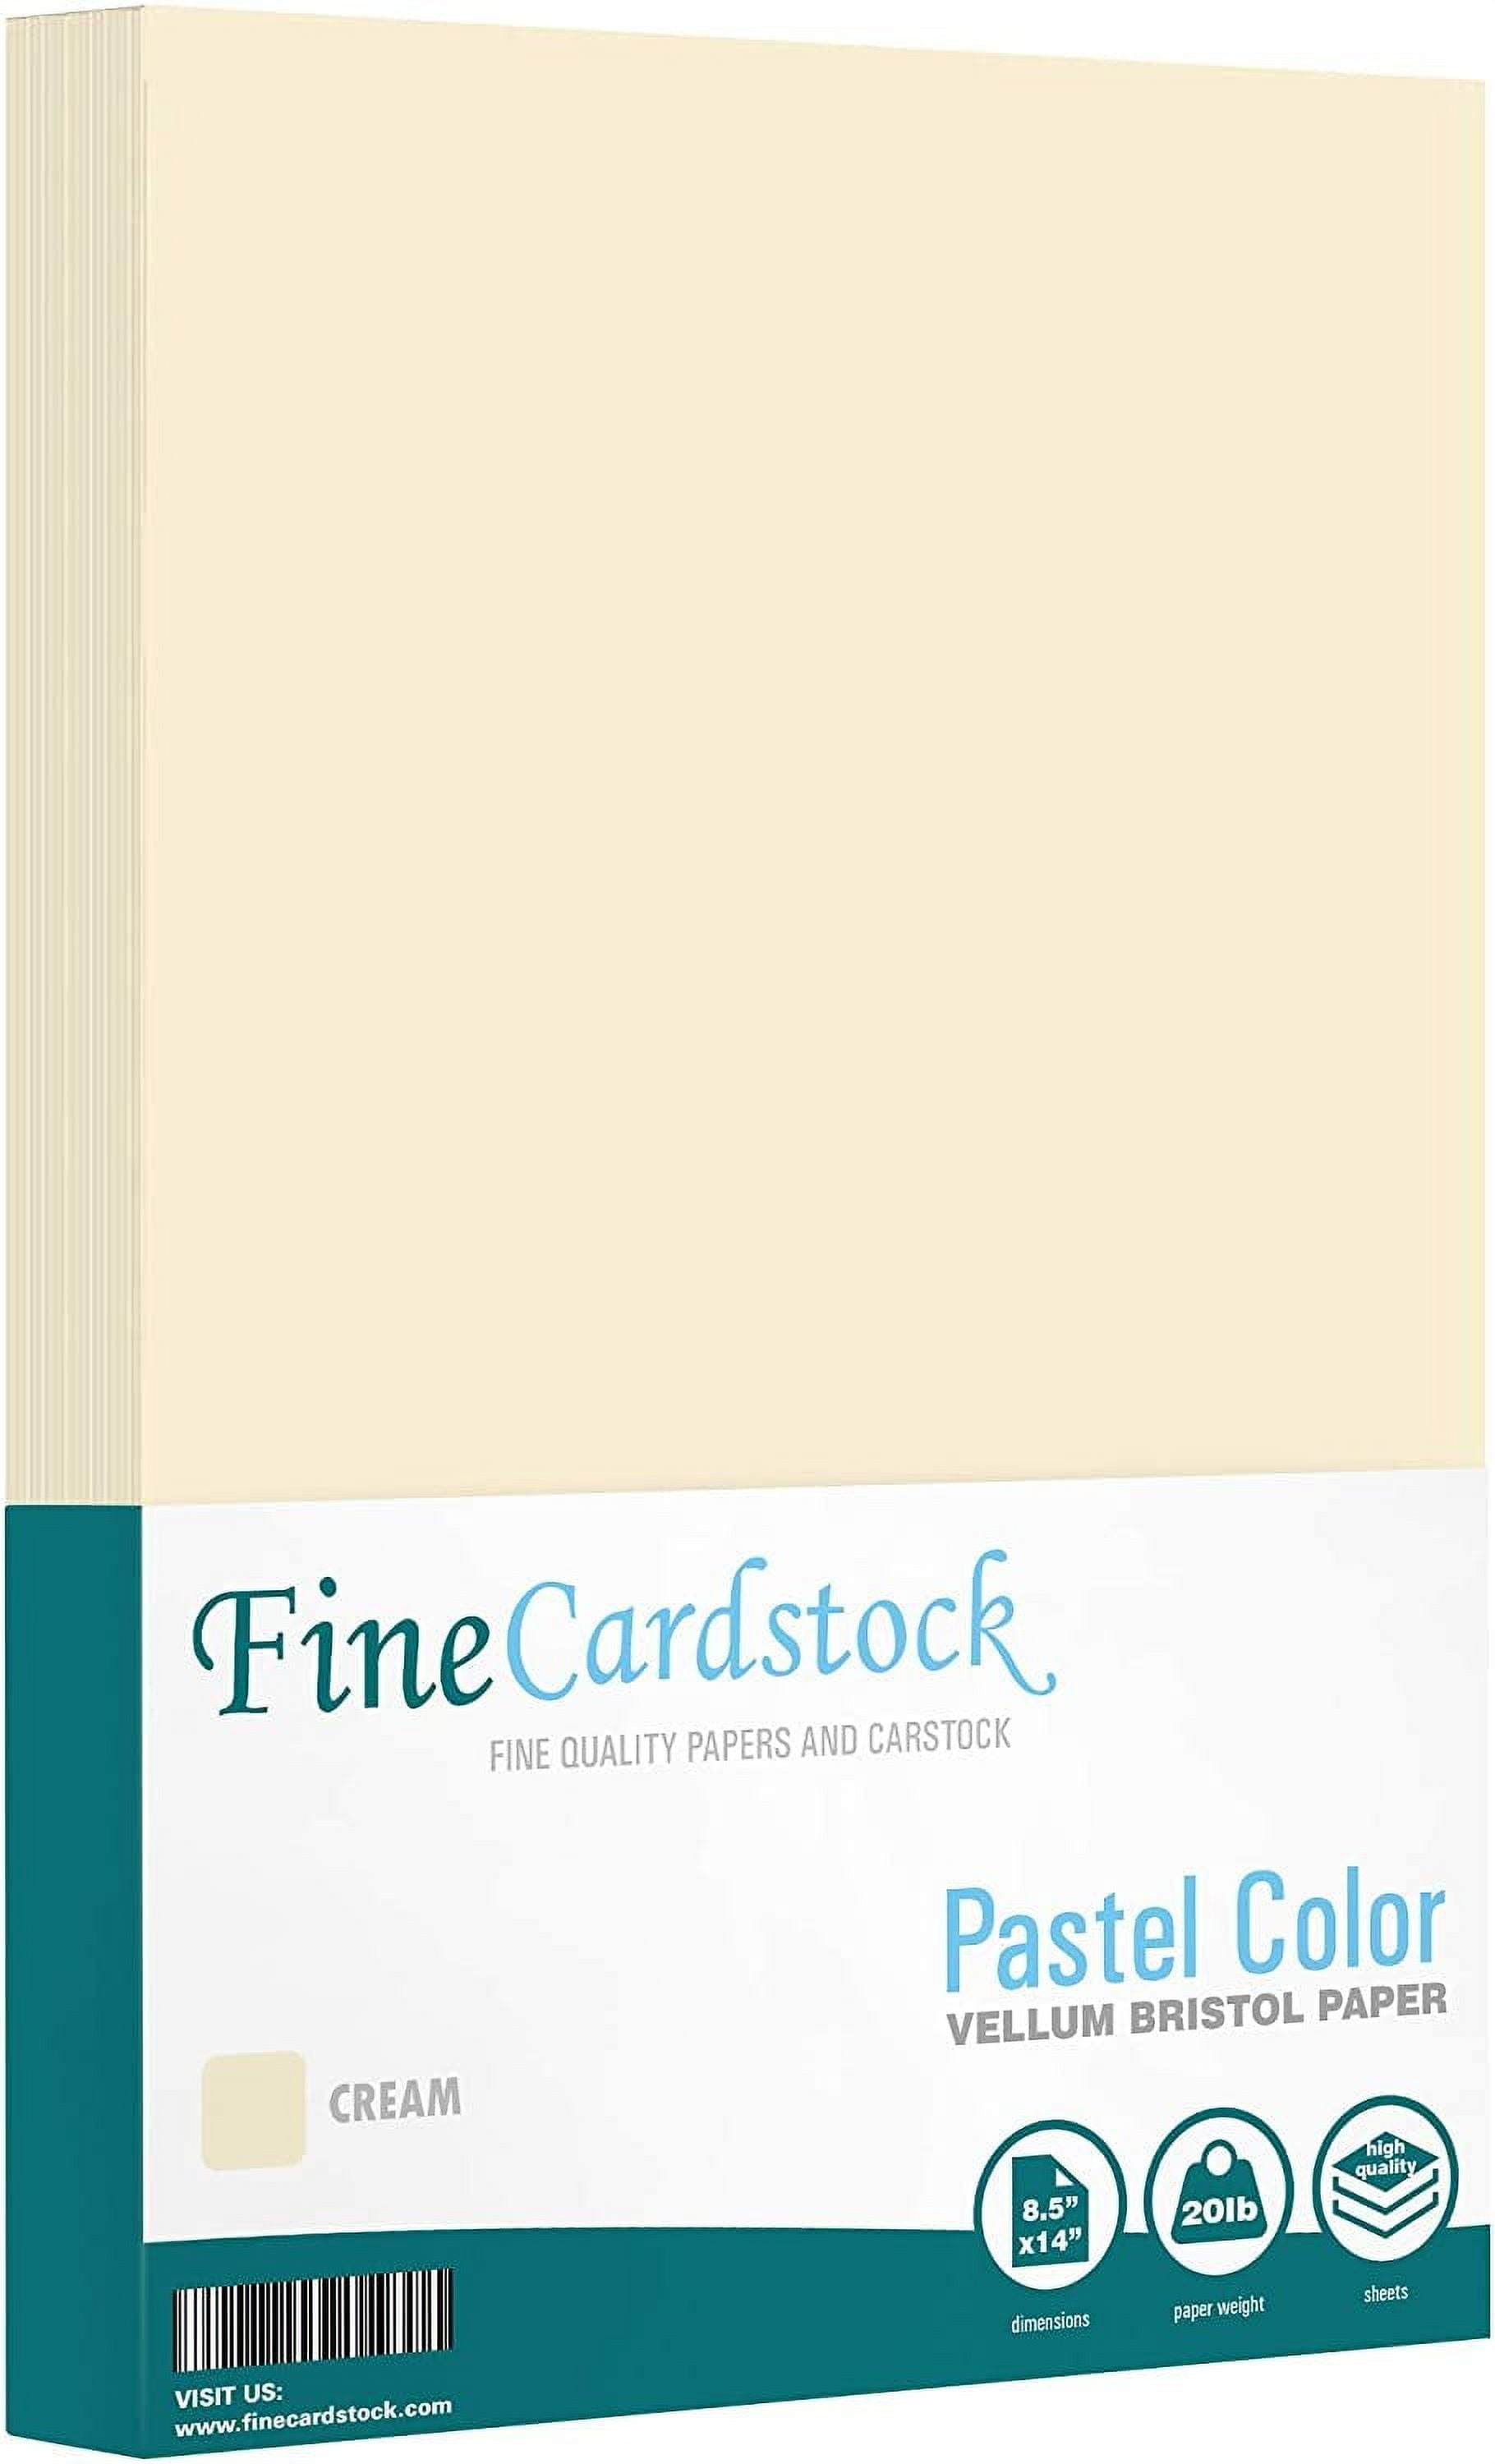 8.5 x 14” Pastel Color Paper – Great for Cards and Stationery Printing, Legal, Menu Size, Lightweight 20lb Paper, 100 Sheets